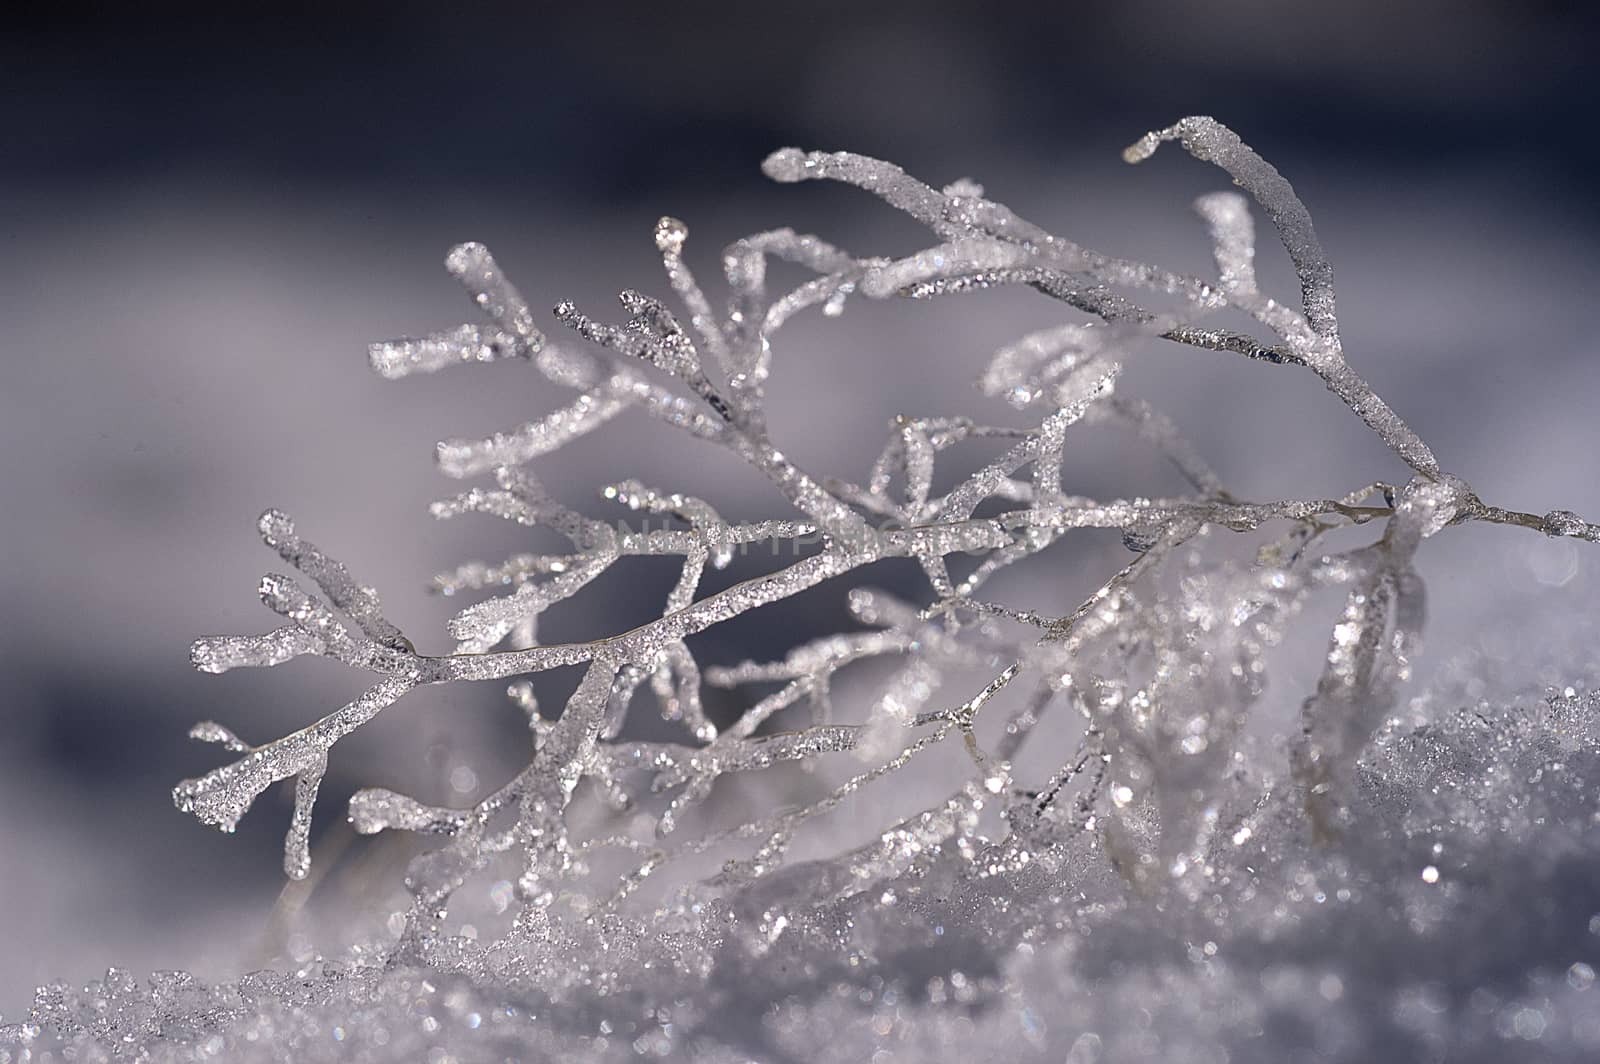 Formations of ice on a small branch in the snow, frost by jalonsohu@gmail.com